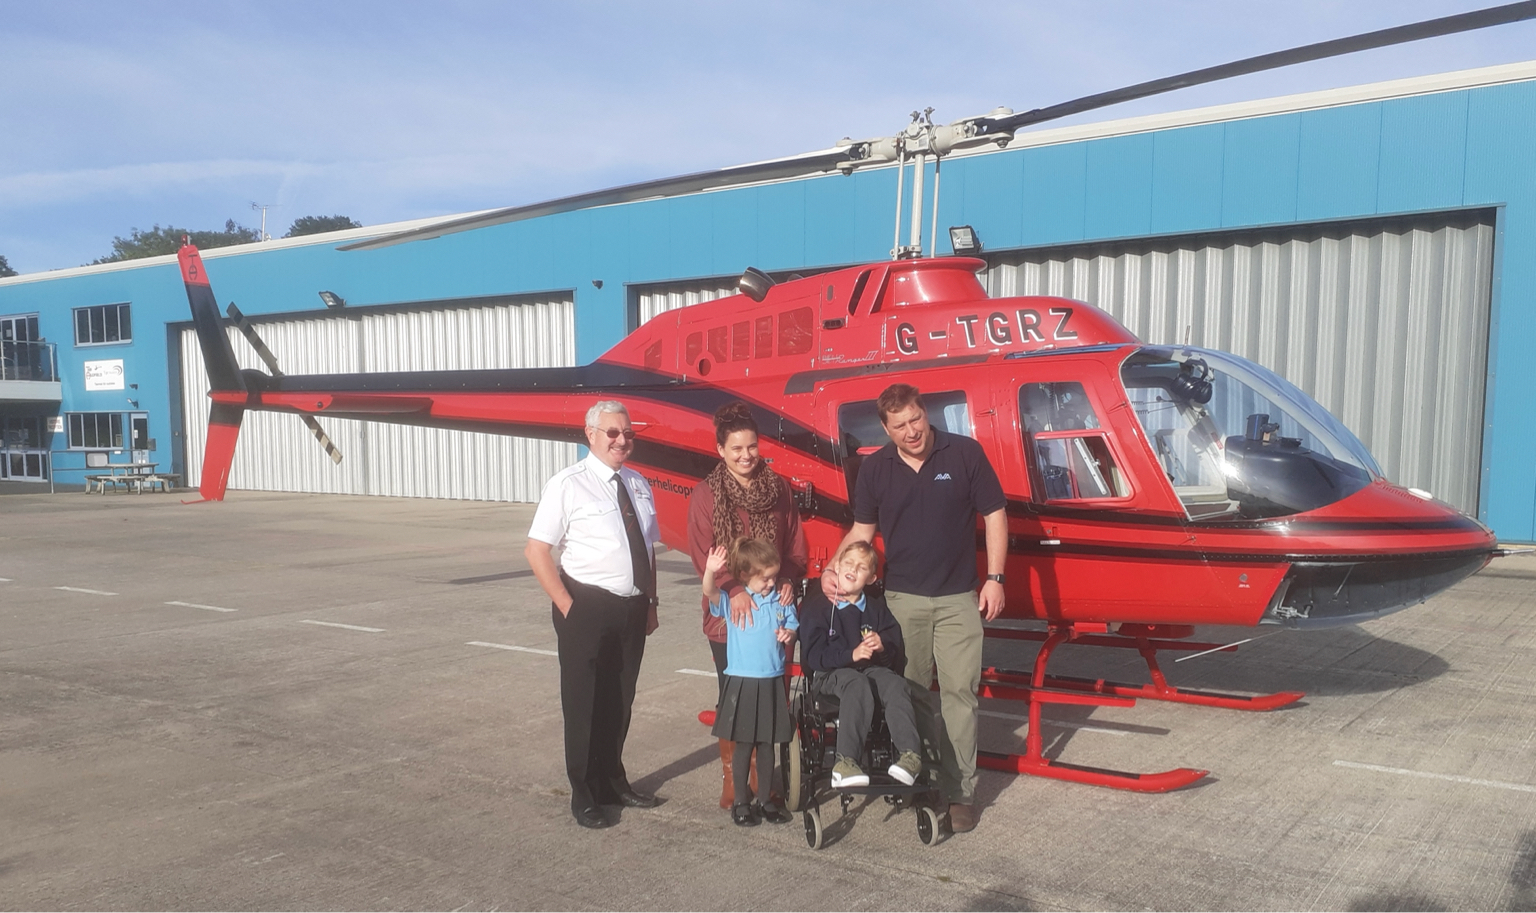 NEWS | Hereford Lions Club and Tiger Helicopters give Sam his wish